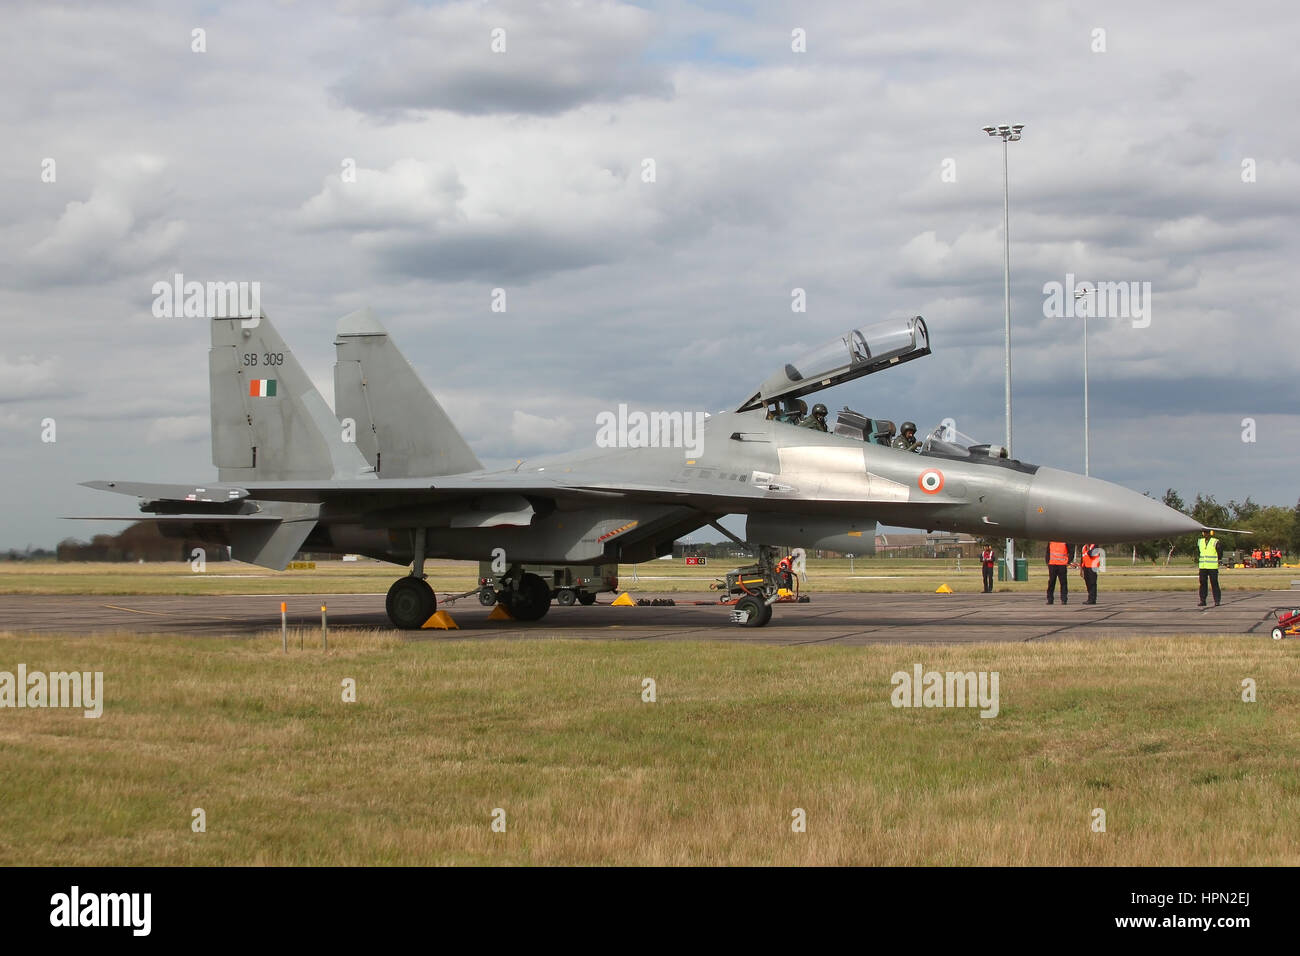 Indian Air Force Su-30MKI Flanker shortly after landing and back at it's dispersal. Taken during Exercise Indradhanush. Stock Photo